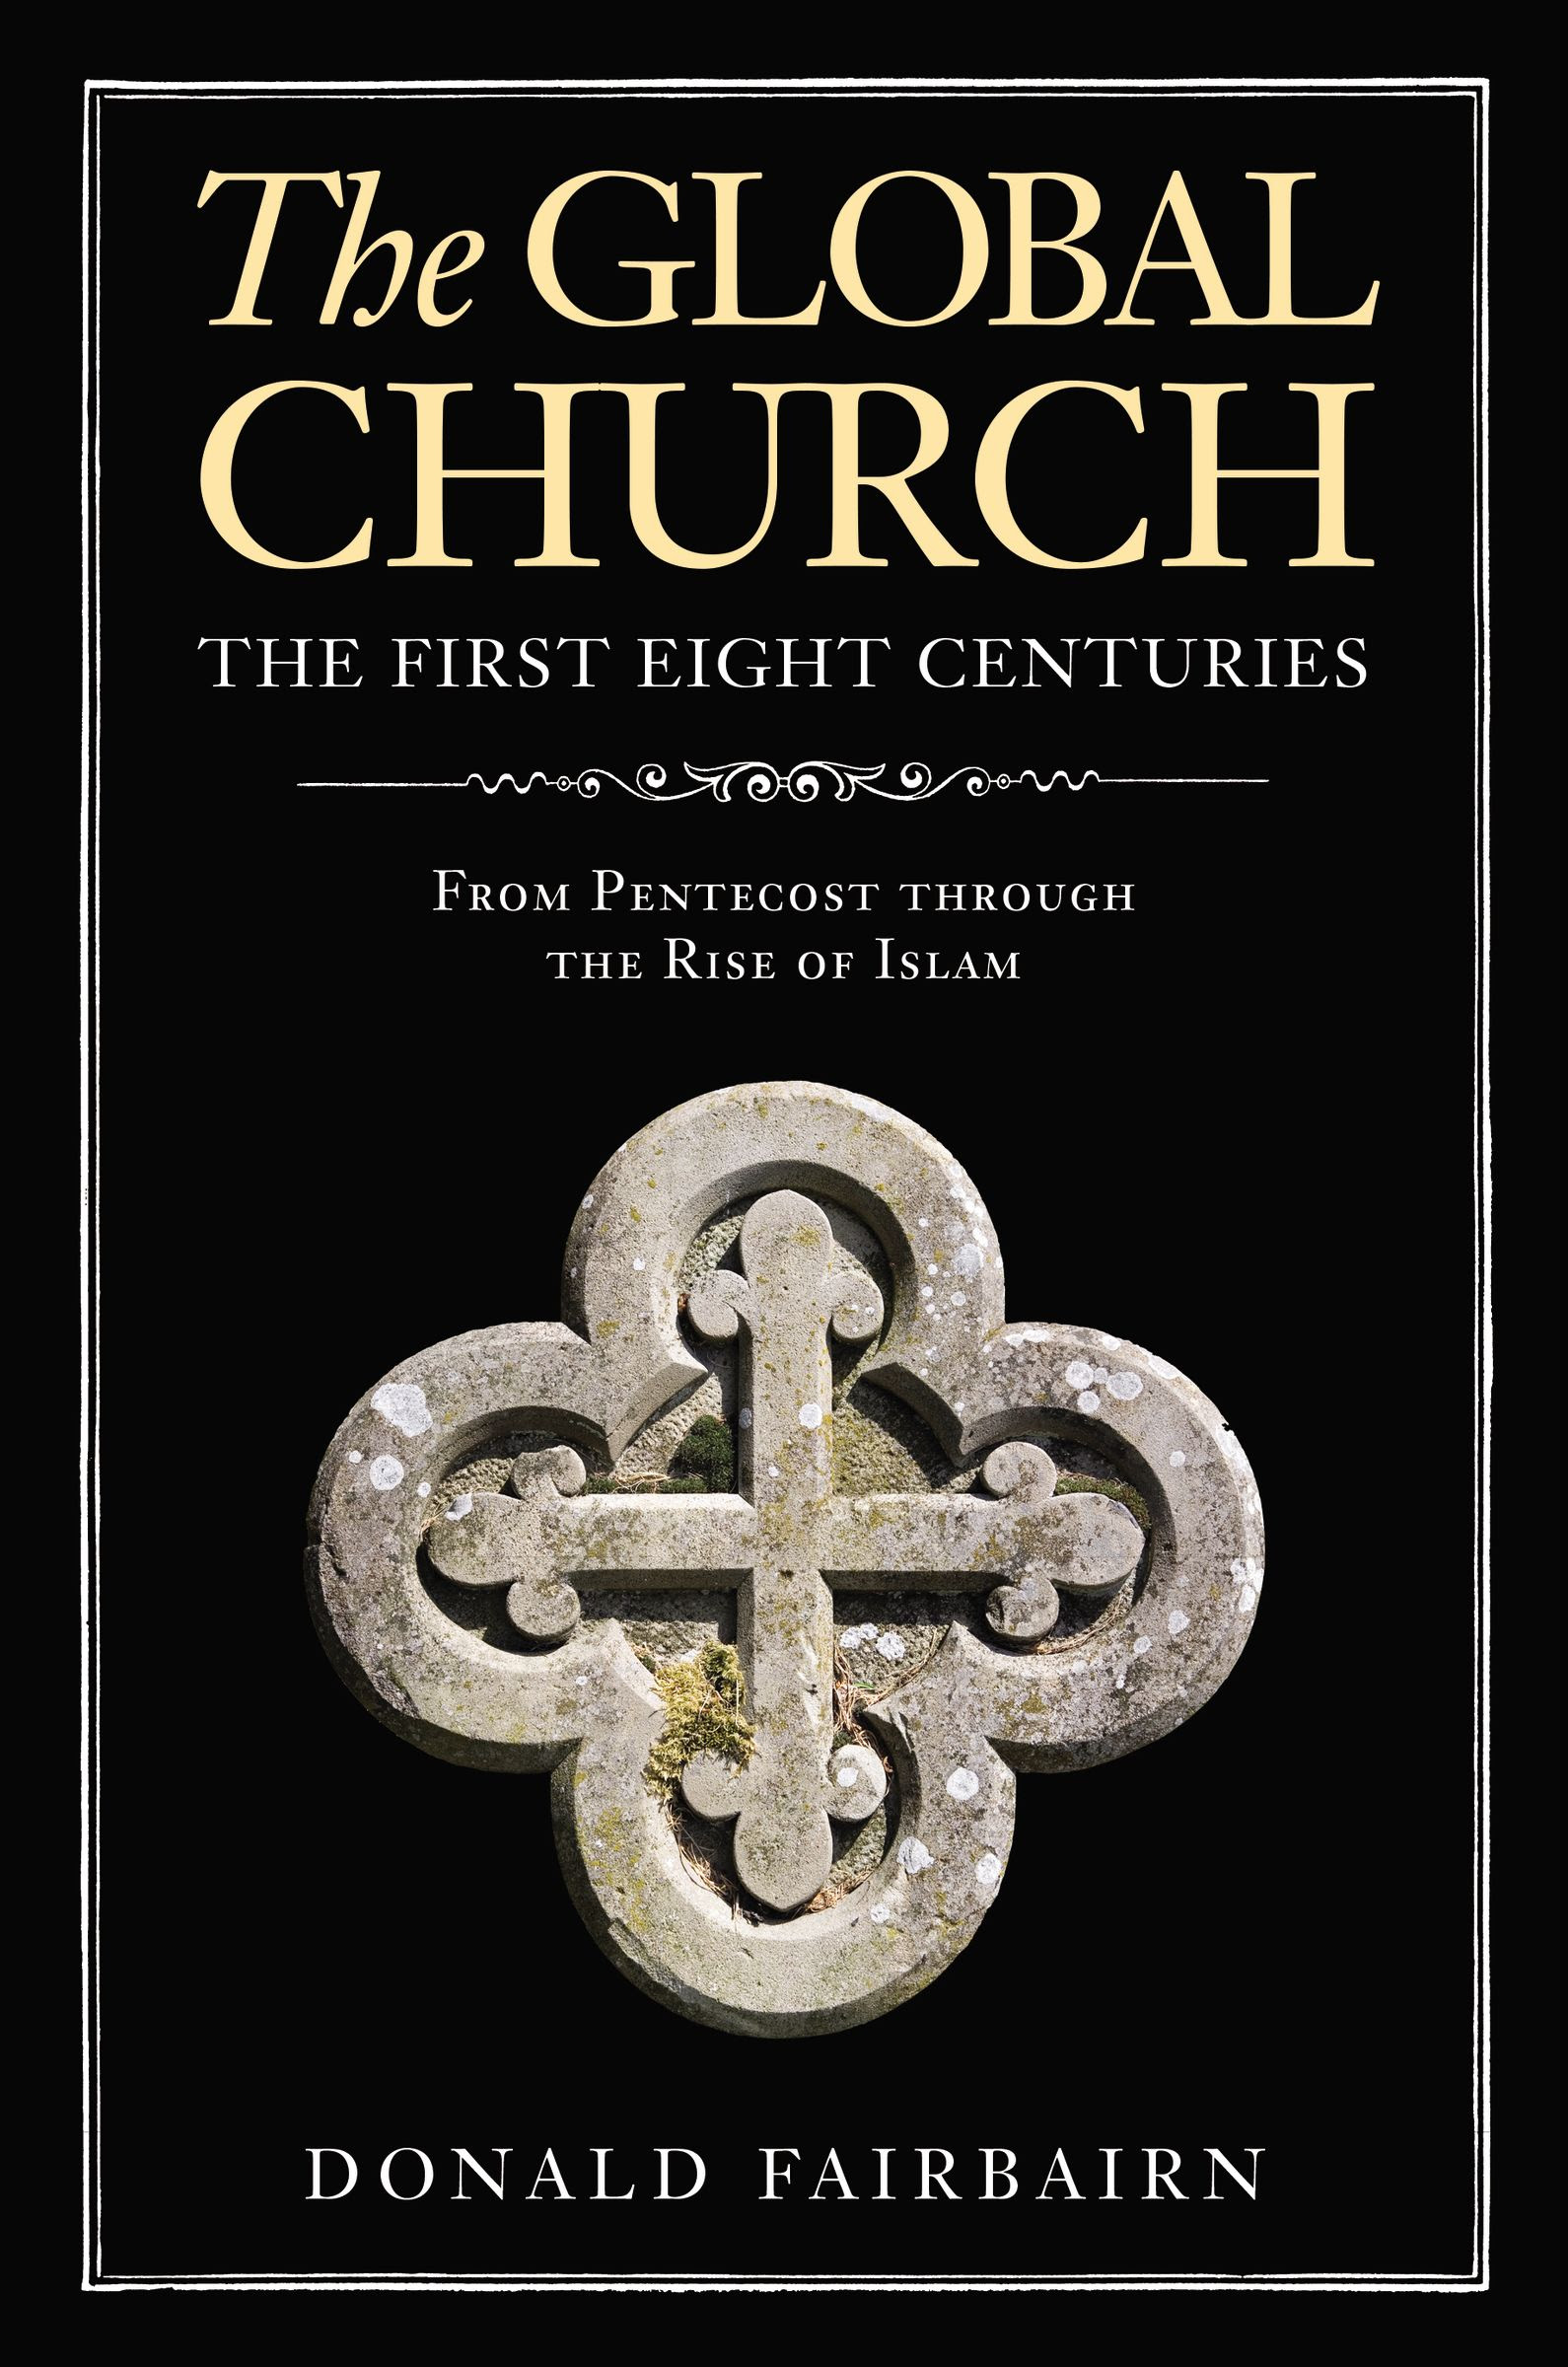 The Global Church---The First Eight Centuries: From Pentecost through the Rise of Islam PDF